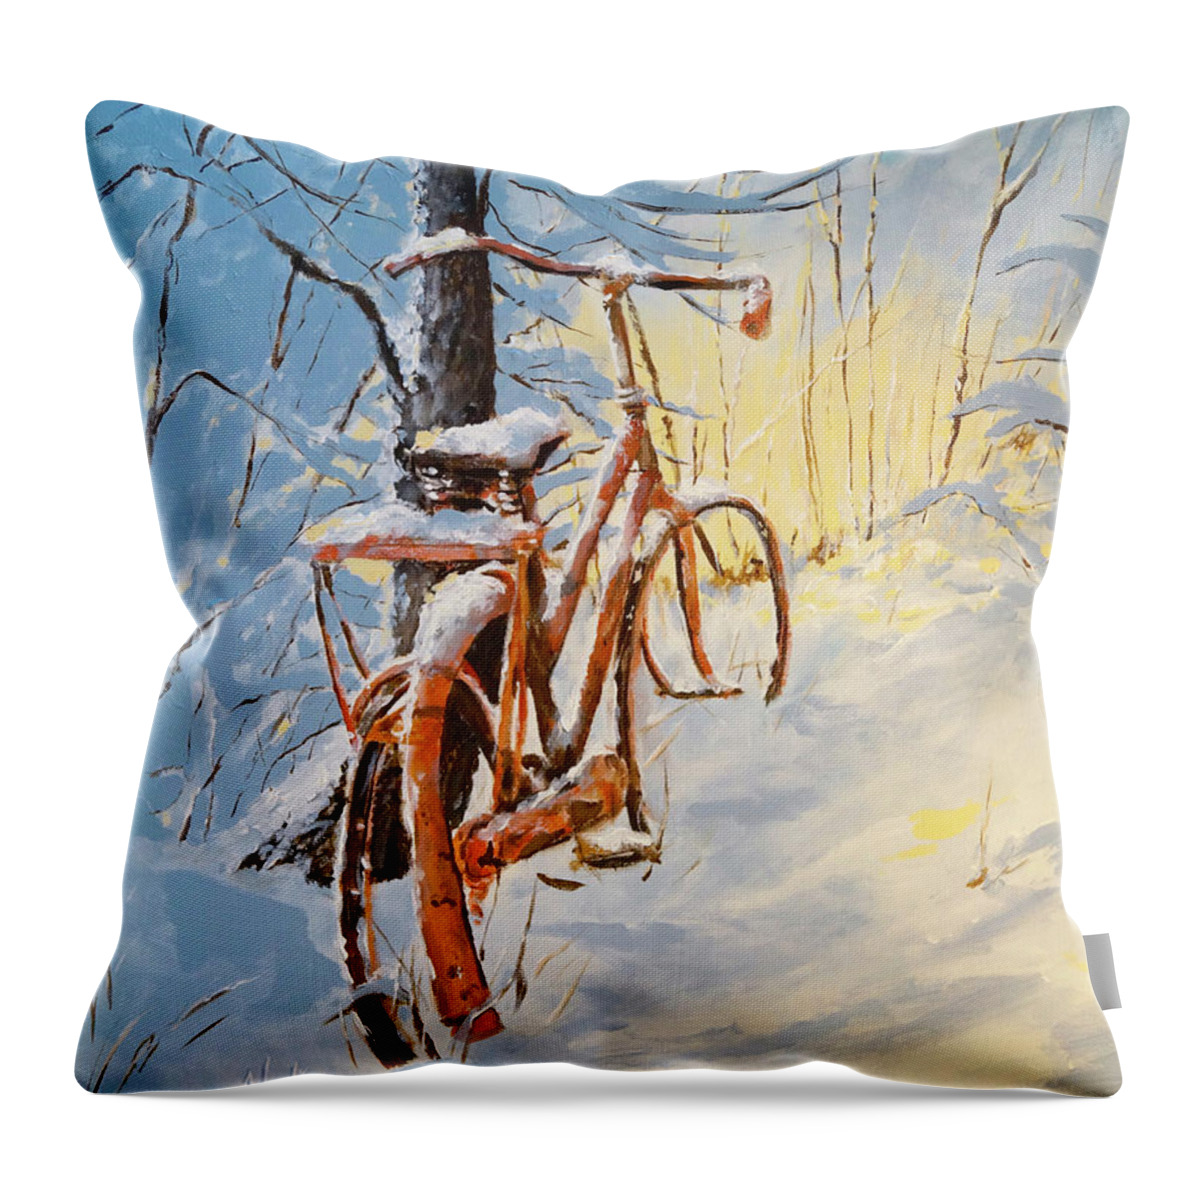 Snow Throw Pillow featuring the painting Forgotten by Alan Lakin